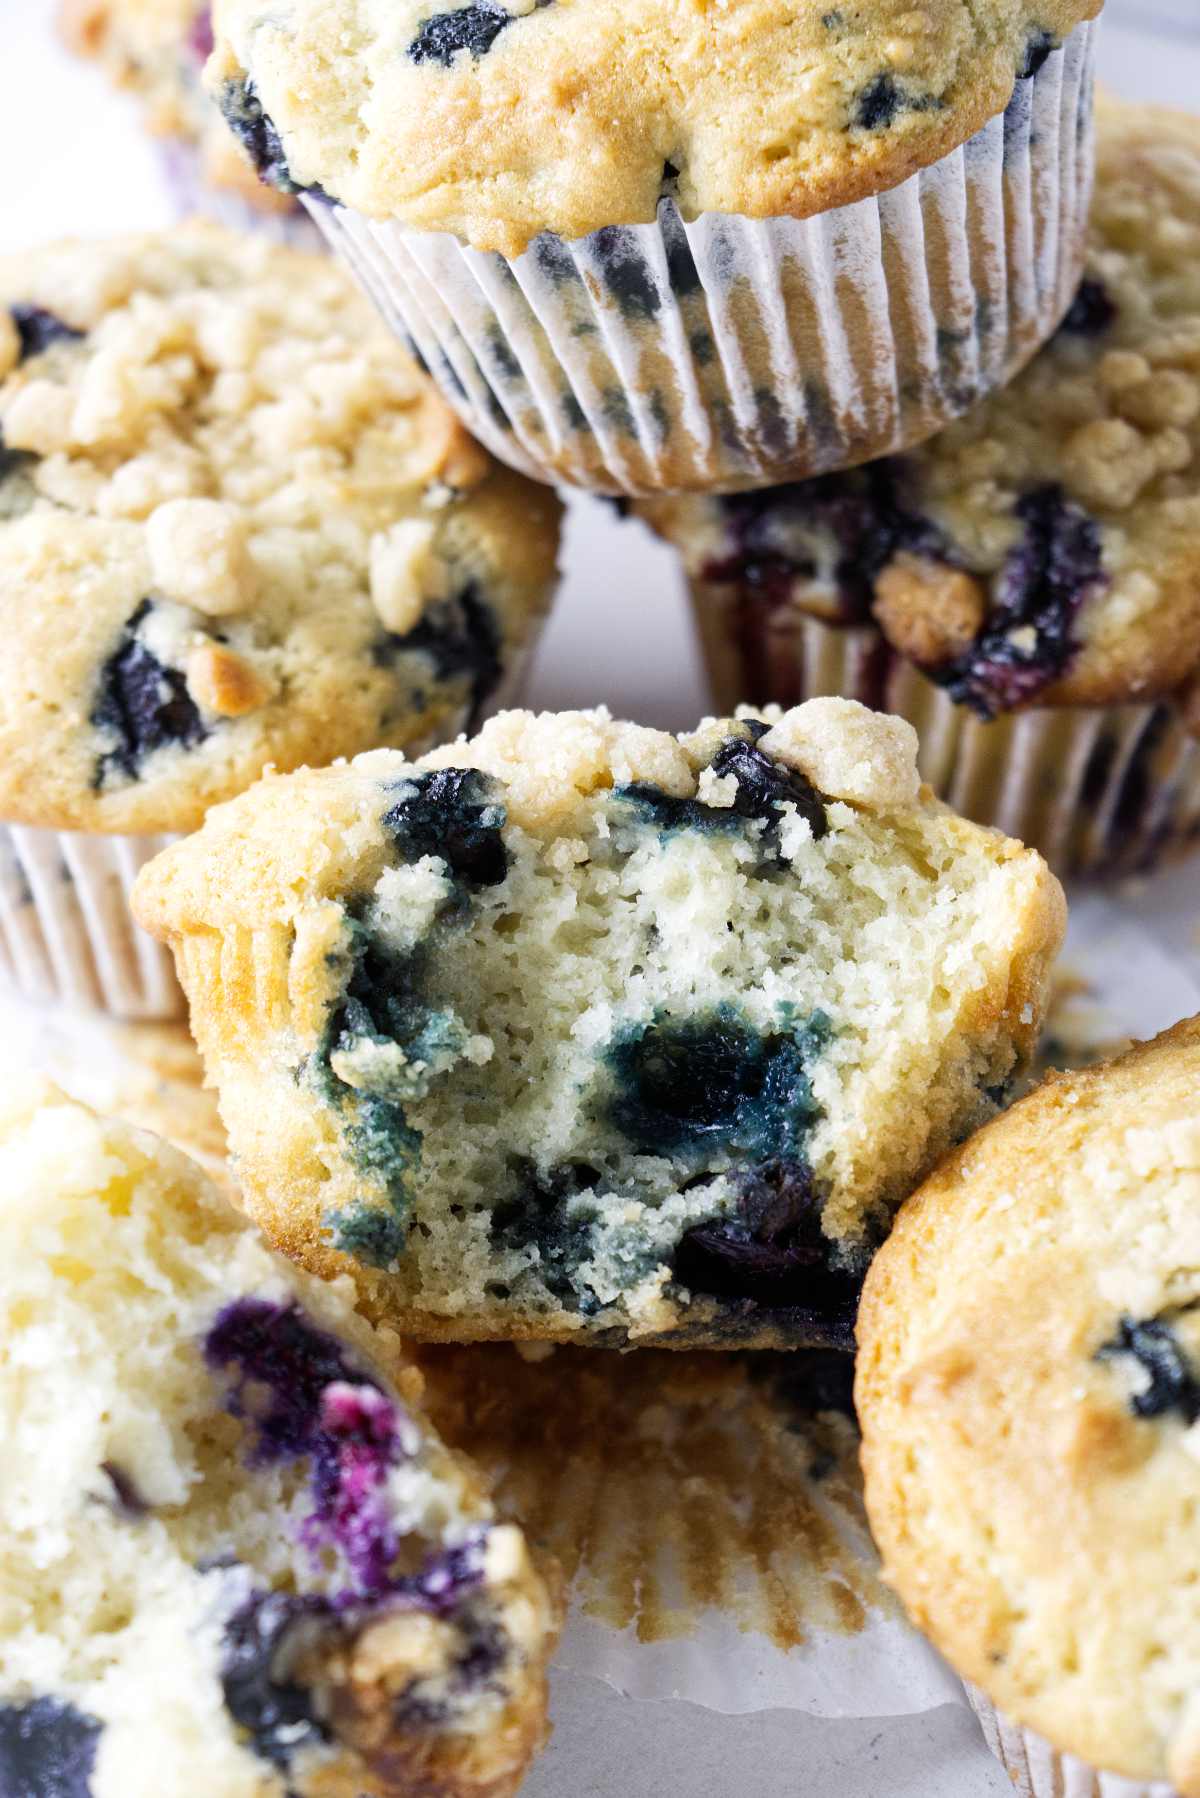 A partially eaten blueberry muffin surrounded by more muffins.